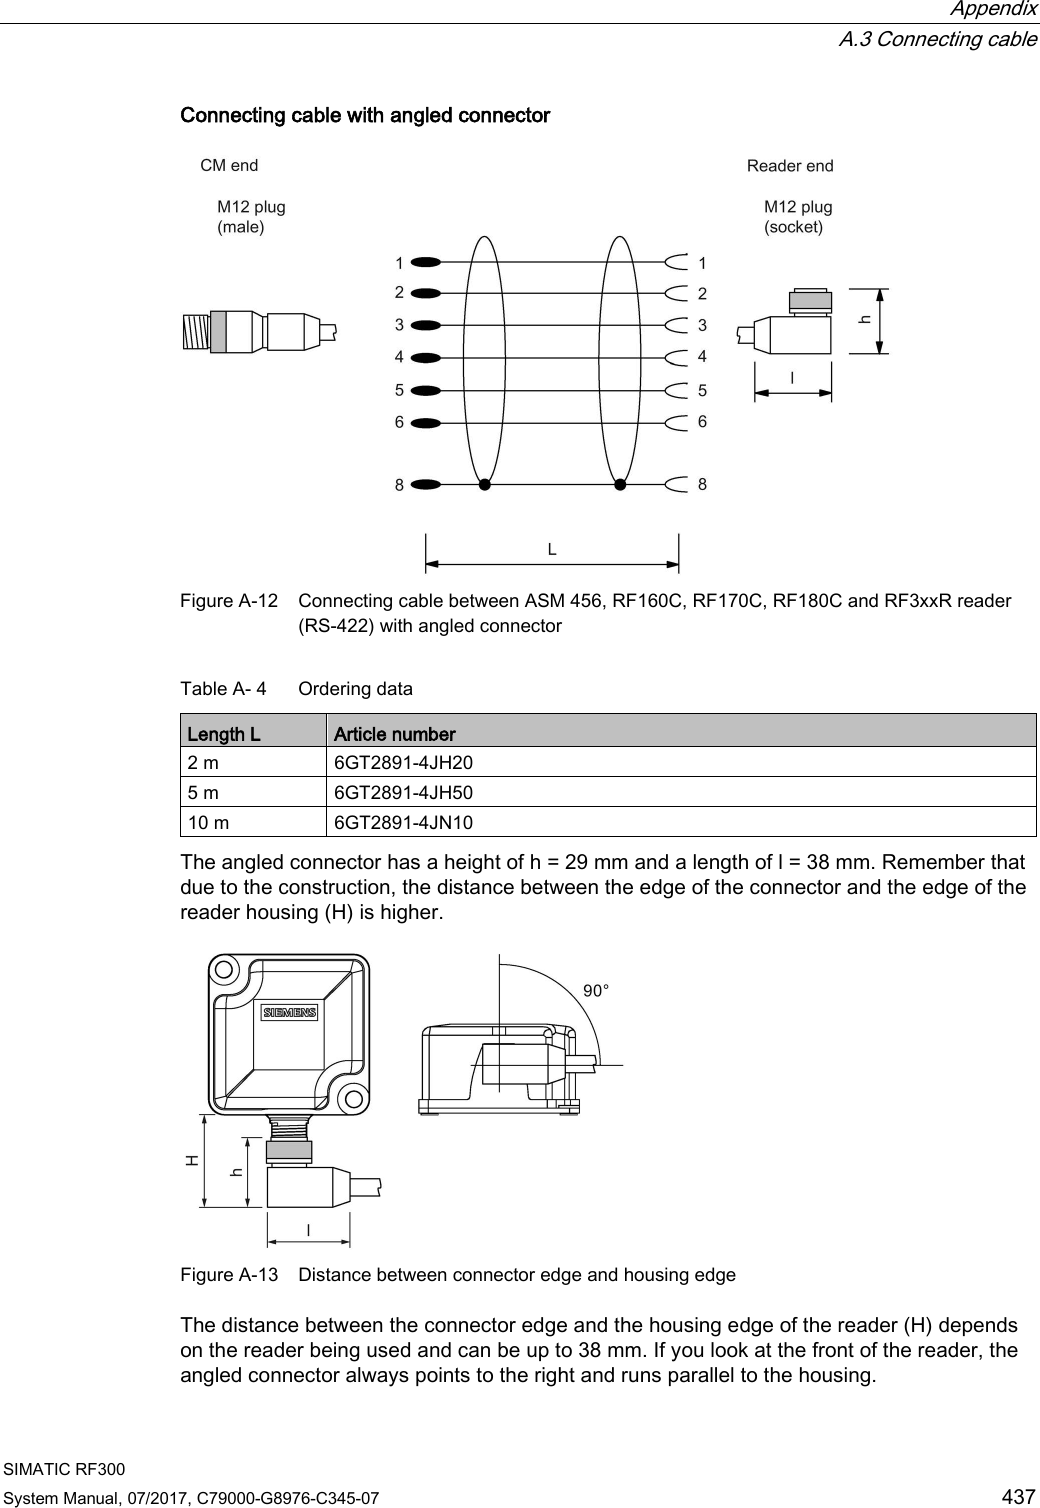  Appendix  A.3 Connecting cable SIMATIC RF300 System Manual, 07/2017, C79000-G8976-C345-07 437 Connecting cable with angled connector  Figure A-12 Connecting cable between ASM 456, RF160C, RF170C, RF180C and RF3xxR reader (RS-422) with angled connector Table A- 4  Ordering data Length L Article number 2 m 6GT2891-4JH20 5 m 6GT2891-4JH50 10 m  6GT2891-4JN10 The angled connector has a height of h = 29 mm and a length of l = 38 mm. Remember that due to the construction, the distance between the edge of the connector and the edge of the reader housing (H) is higher.  Figure A-13 Distance between connector edge and housing edge The distance between the connector edge and the housing edge of the reader (H) depends on the reader being used and can be up to 38 mm. If you look at the front of the reader, the angled connector always points to the right and runs parallel to the housing. 